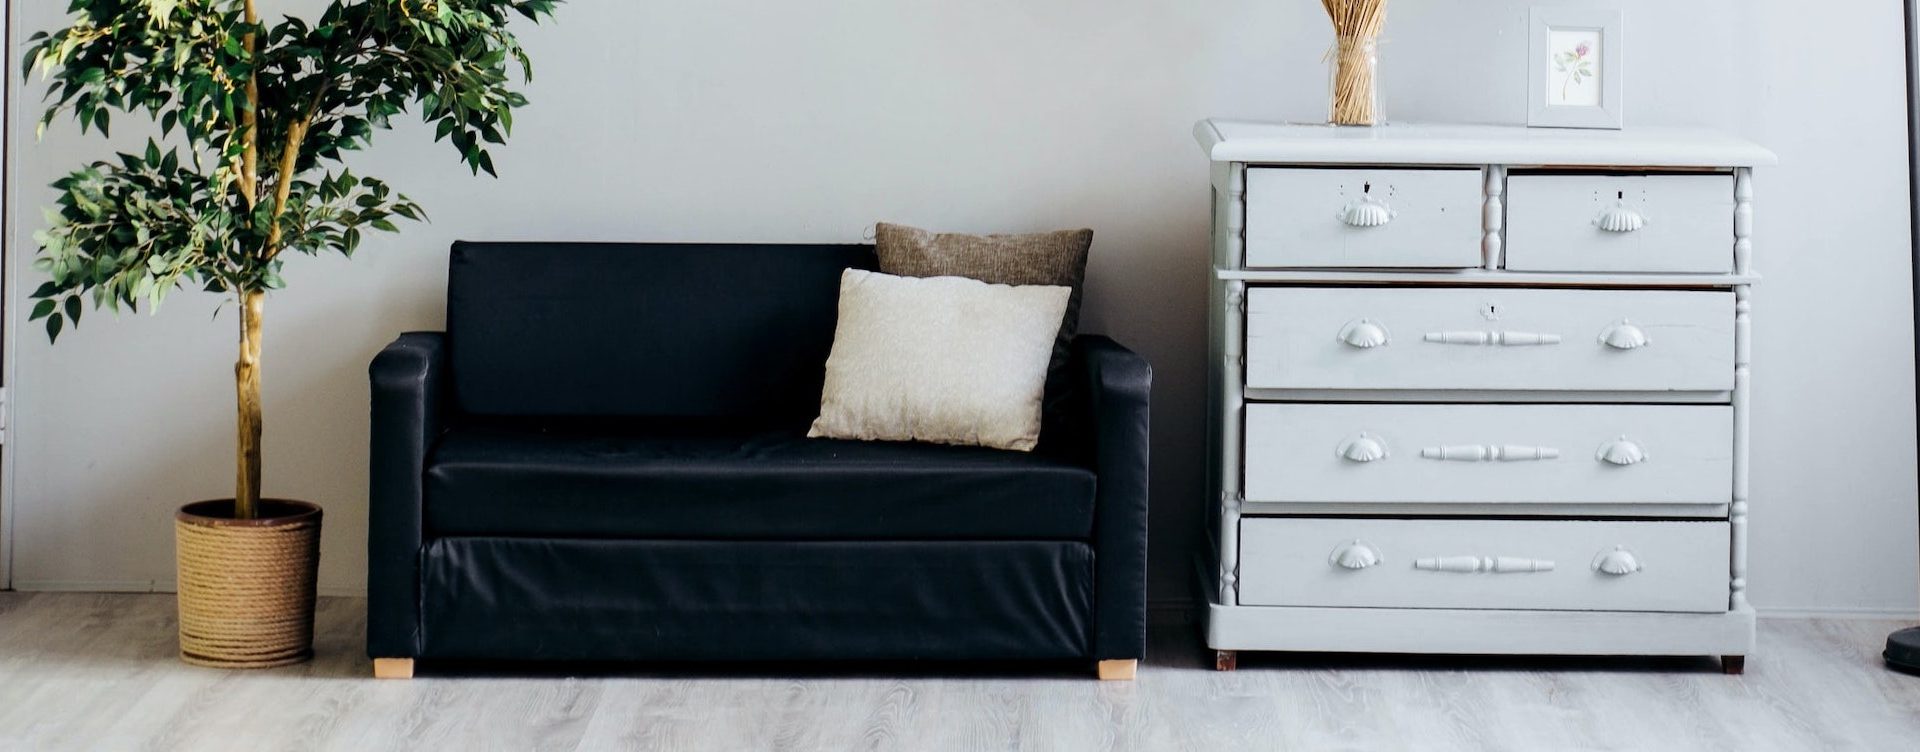 10 Best Good Quality but Cheap Furniture Stores